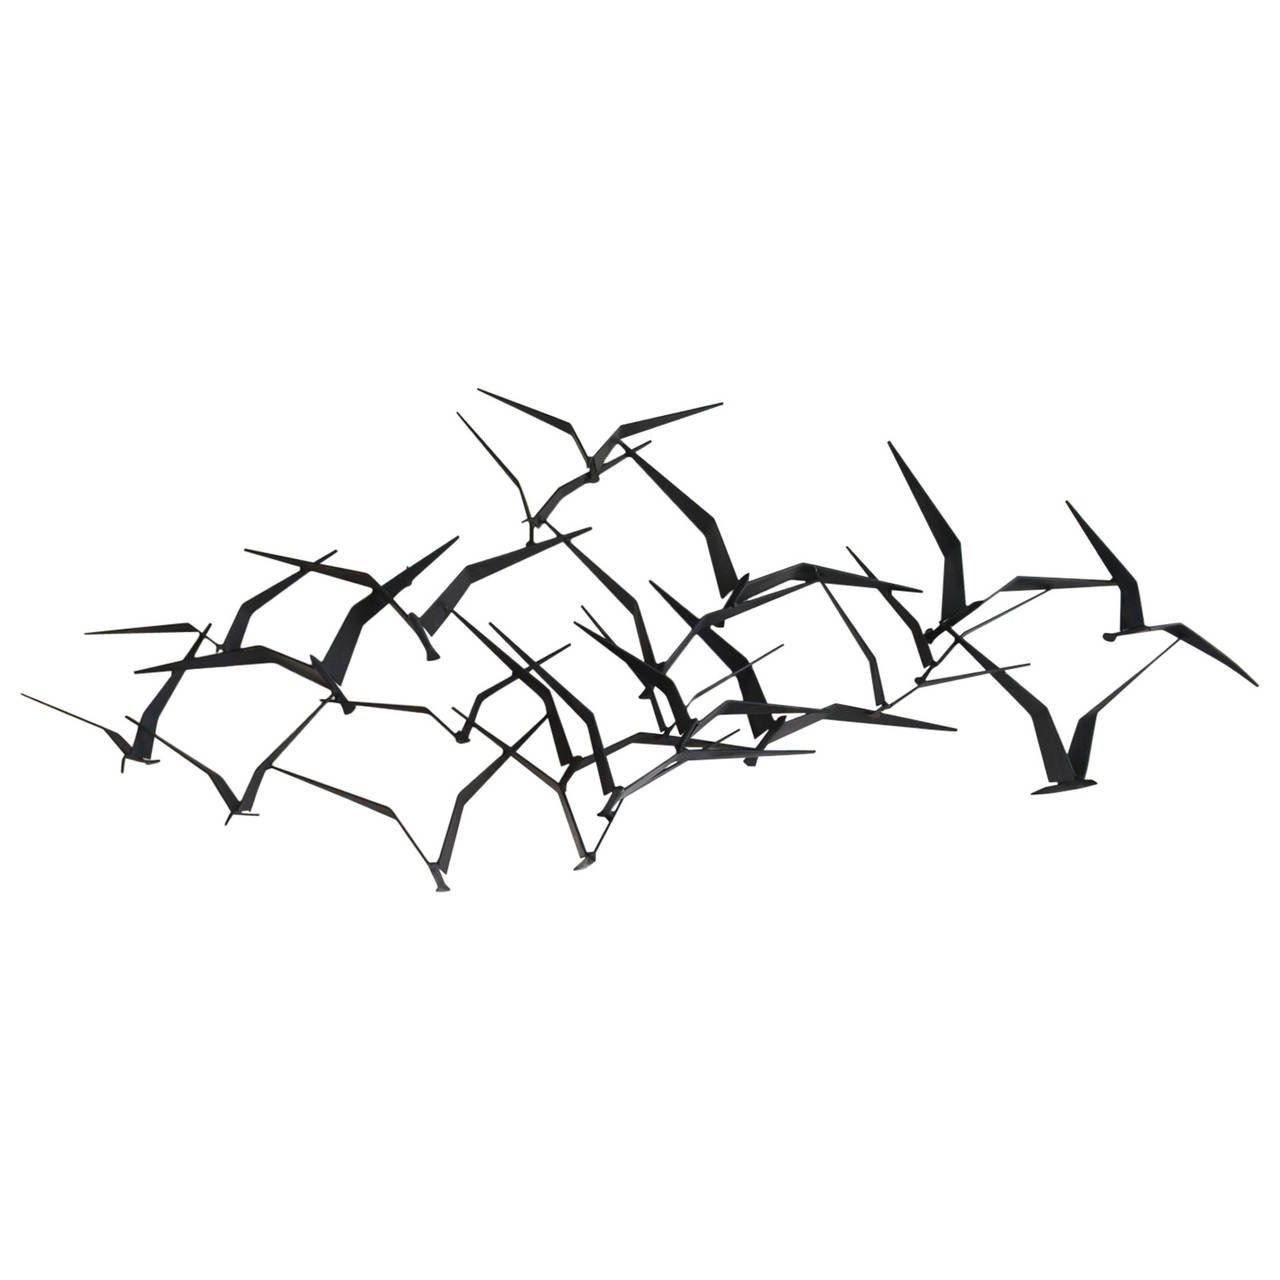 Current Curtis Jere Birds In Flight Metal Wall Sculpture At 1stdibs Throughout Metal Wall Art Birds In Flight (View 12 of 15)